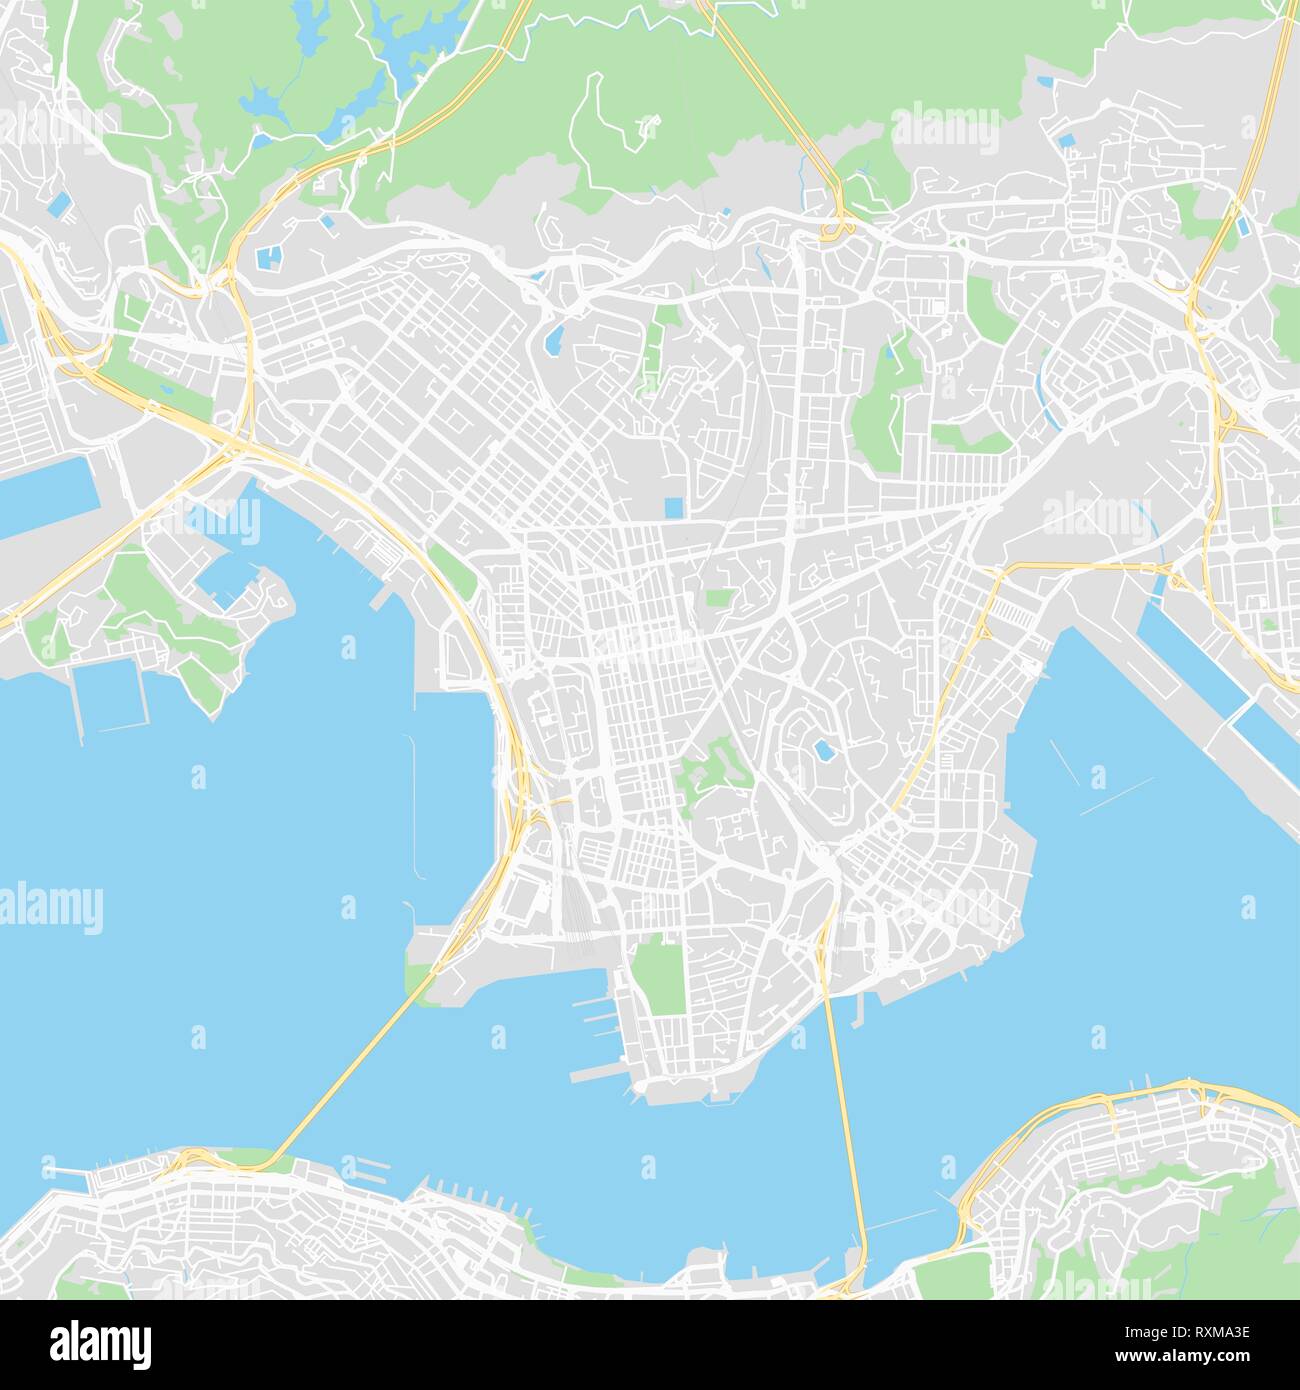 Downtown vector map of Hong Kong, China. This printable map of Hong Kong contains lines and classic colored shapes for land mass, parks, water, major  Stock Vector